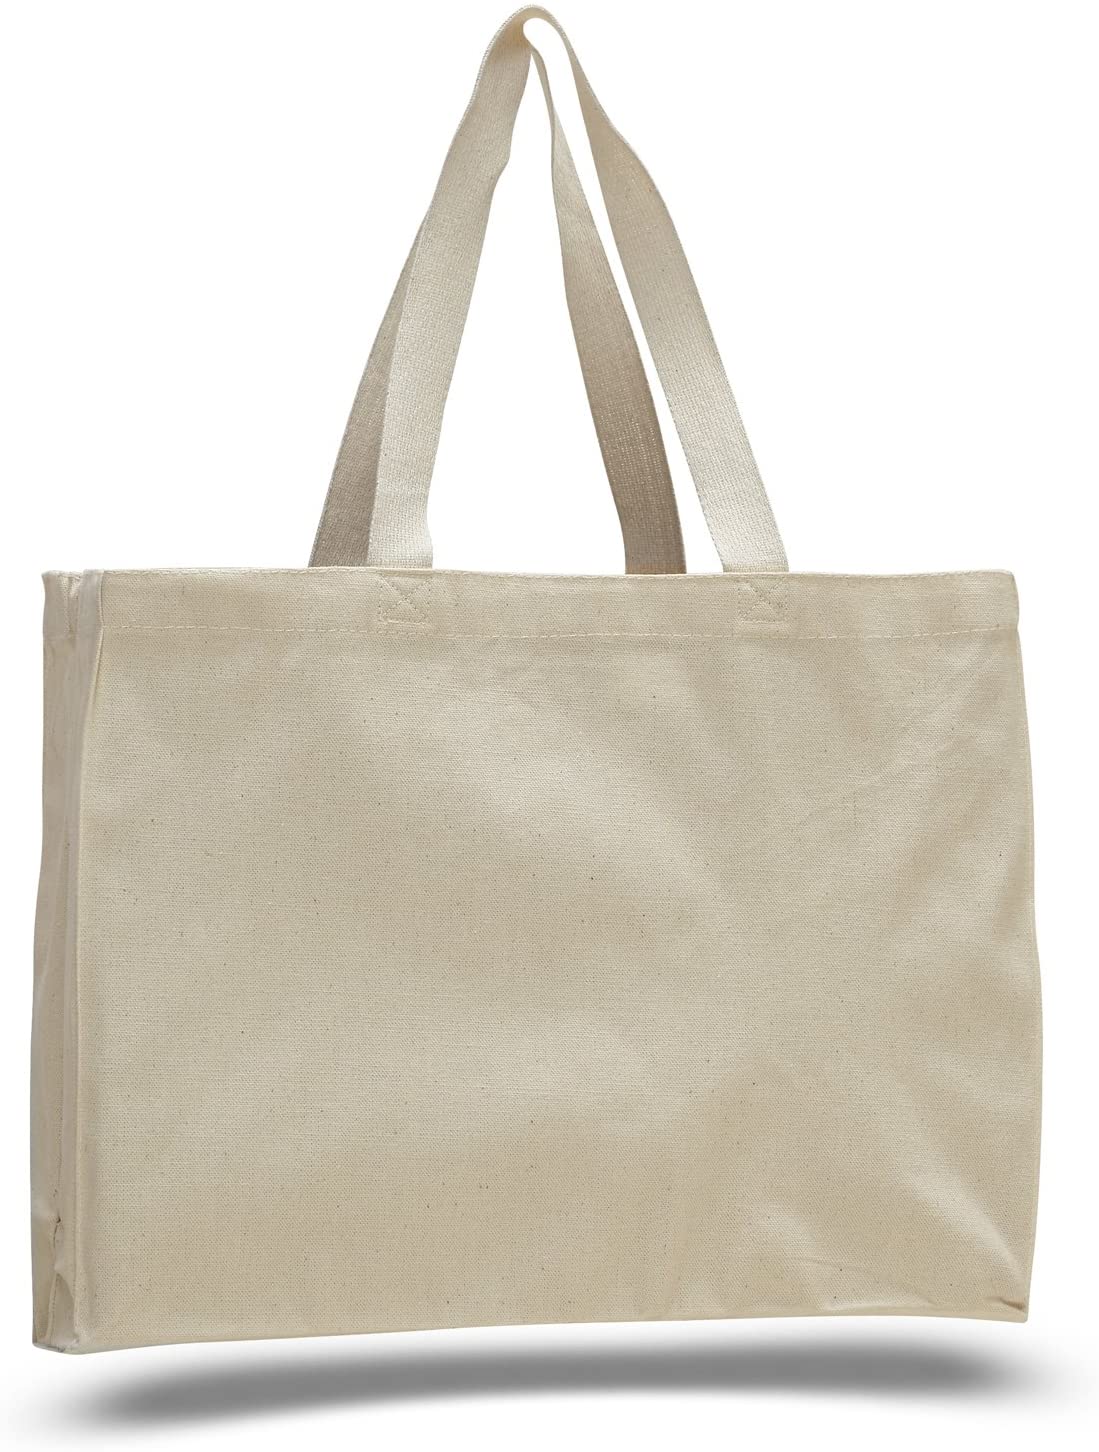 Bulk Heavy Canvas Shopping Tote Bags, Reusable Grocery Shopper Totes Wholesale natural